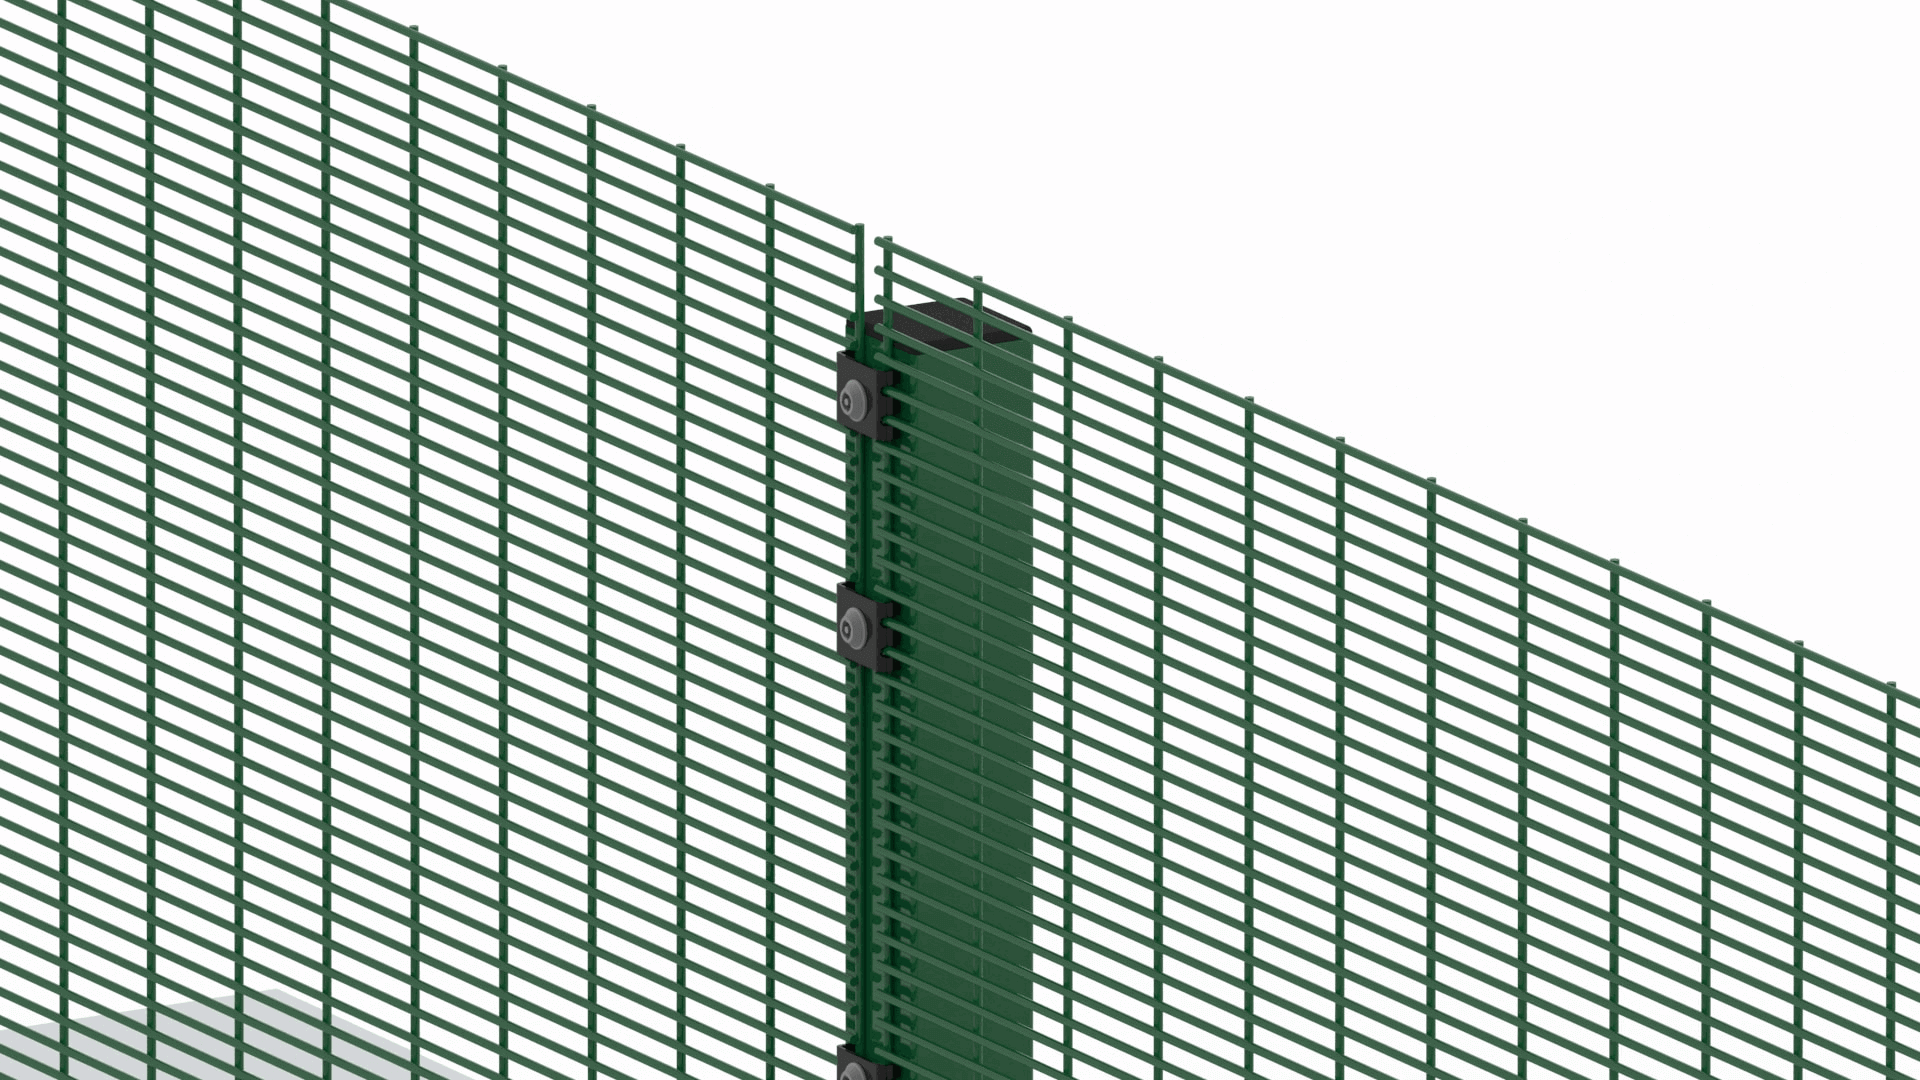 358 Welded Wire Fence: The Ideal Solution for Perimeter Security